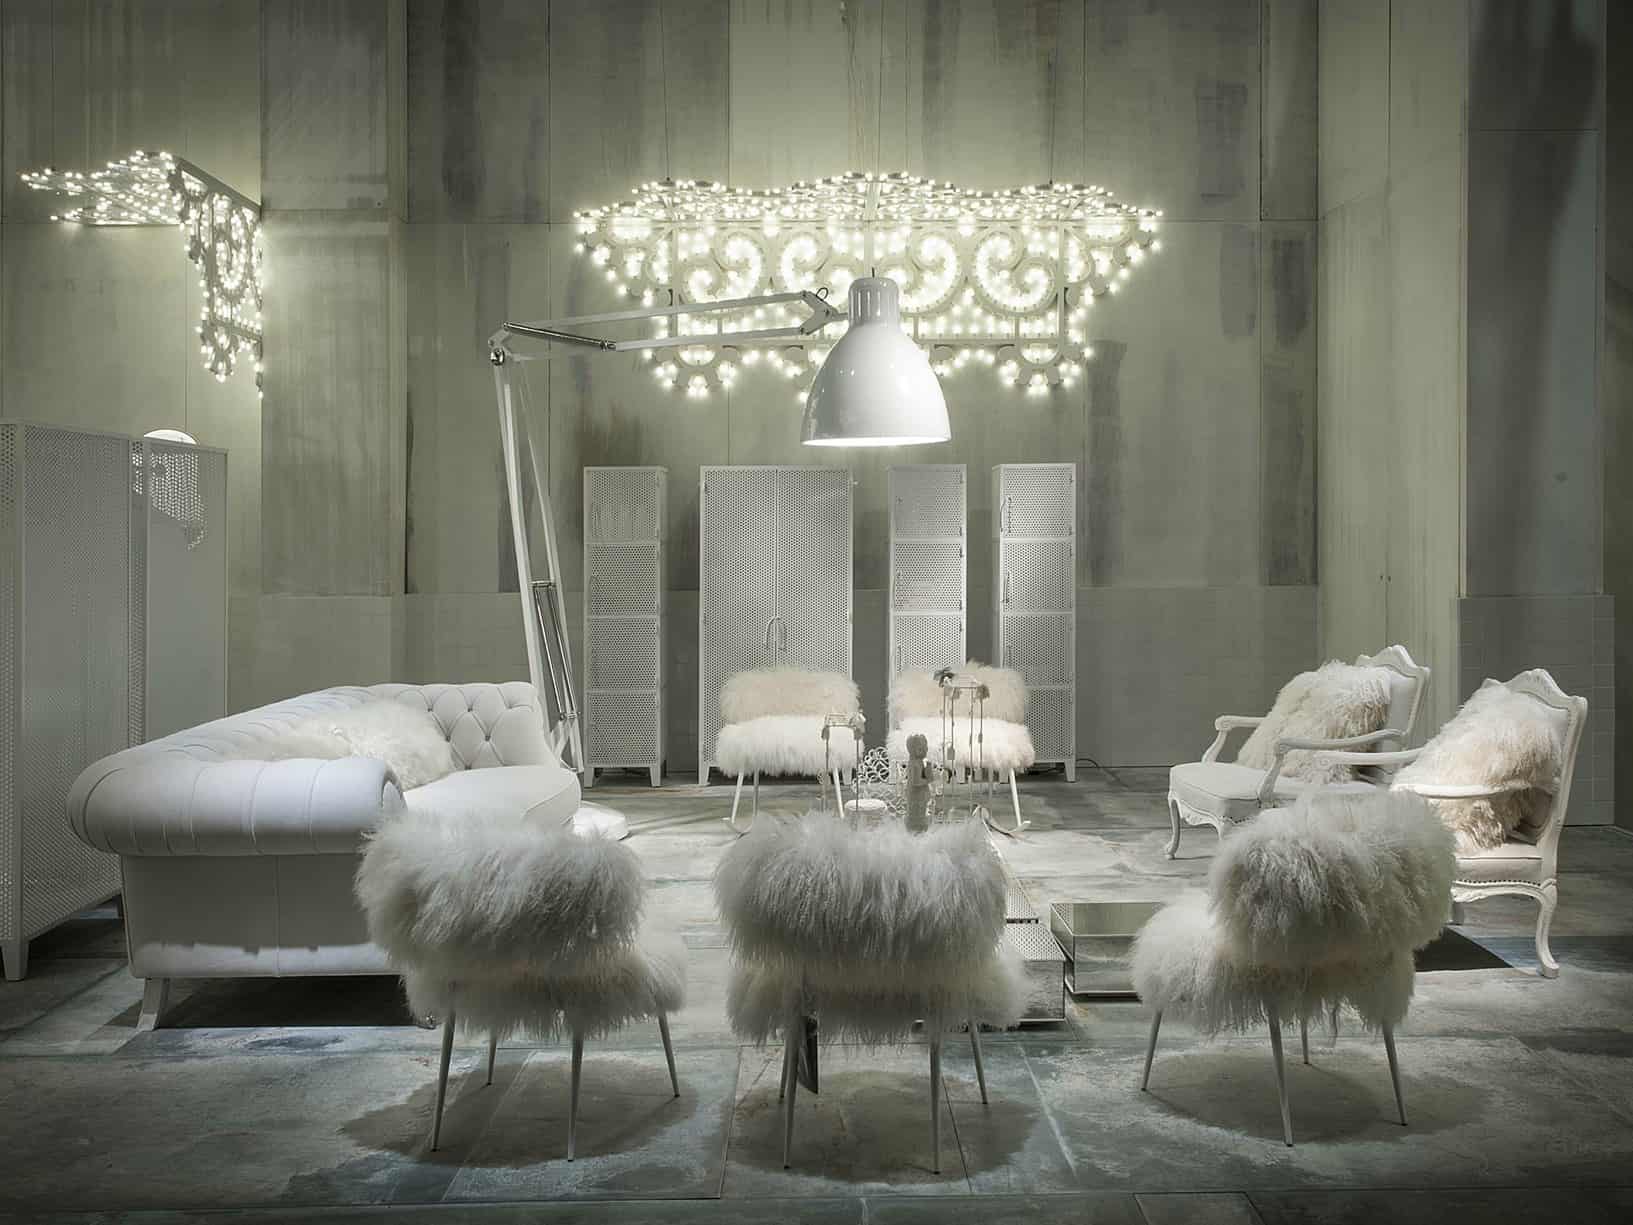 Paola Navone Designs White Fairy Tale like Interiors to Present Latest